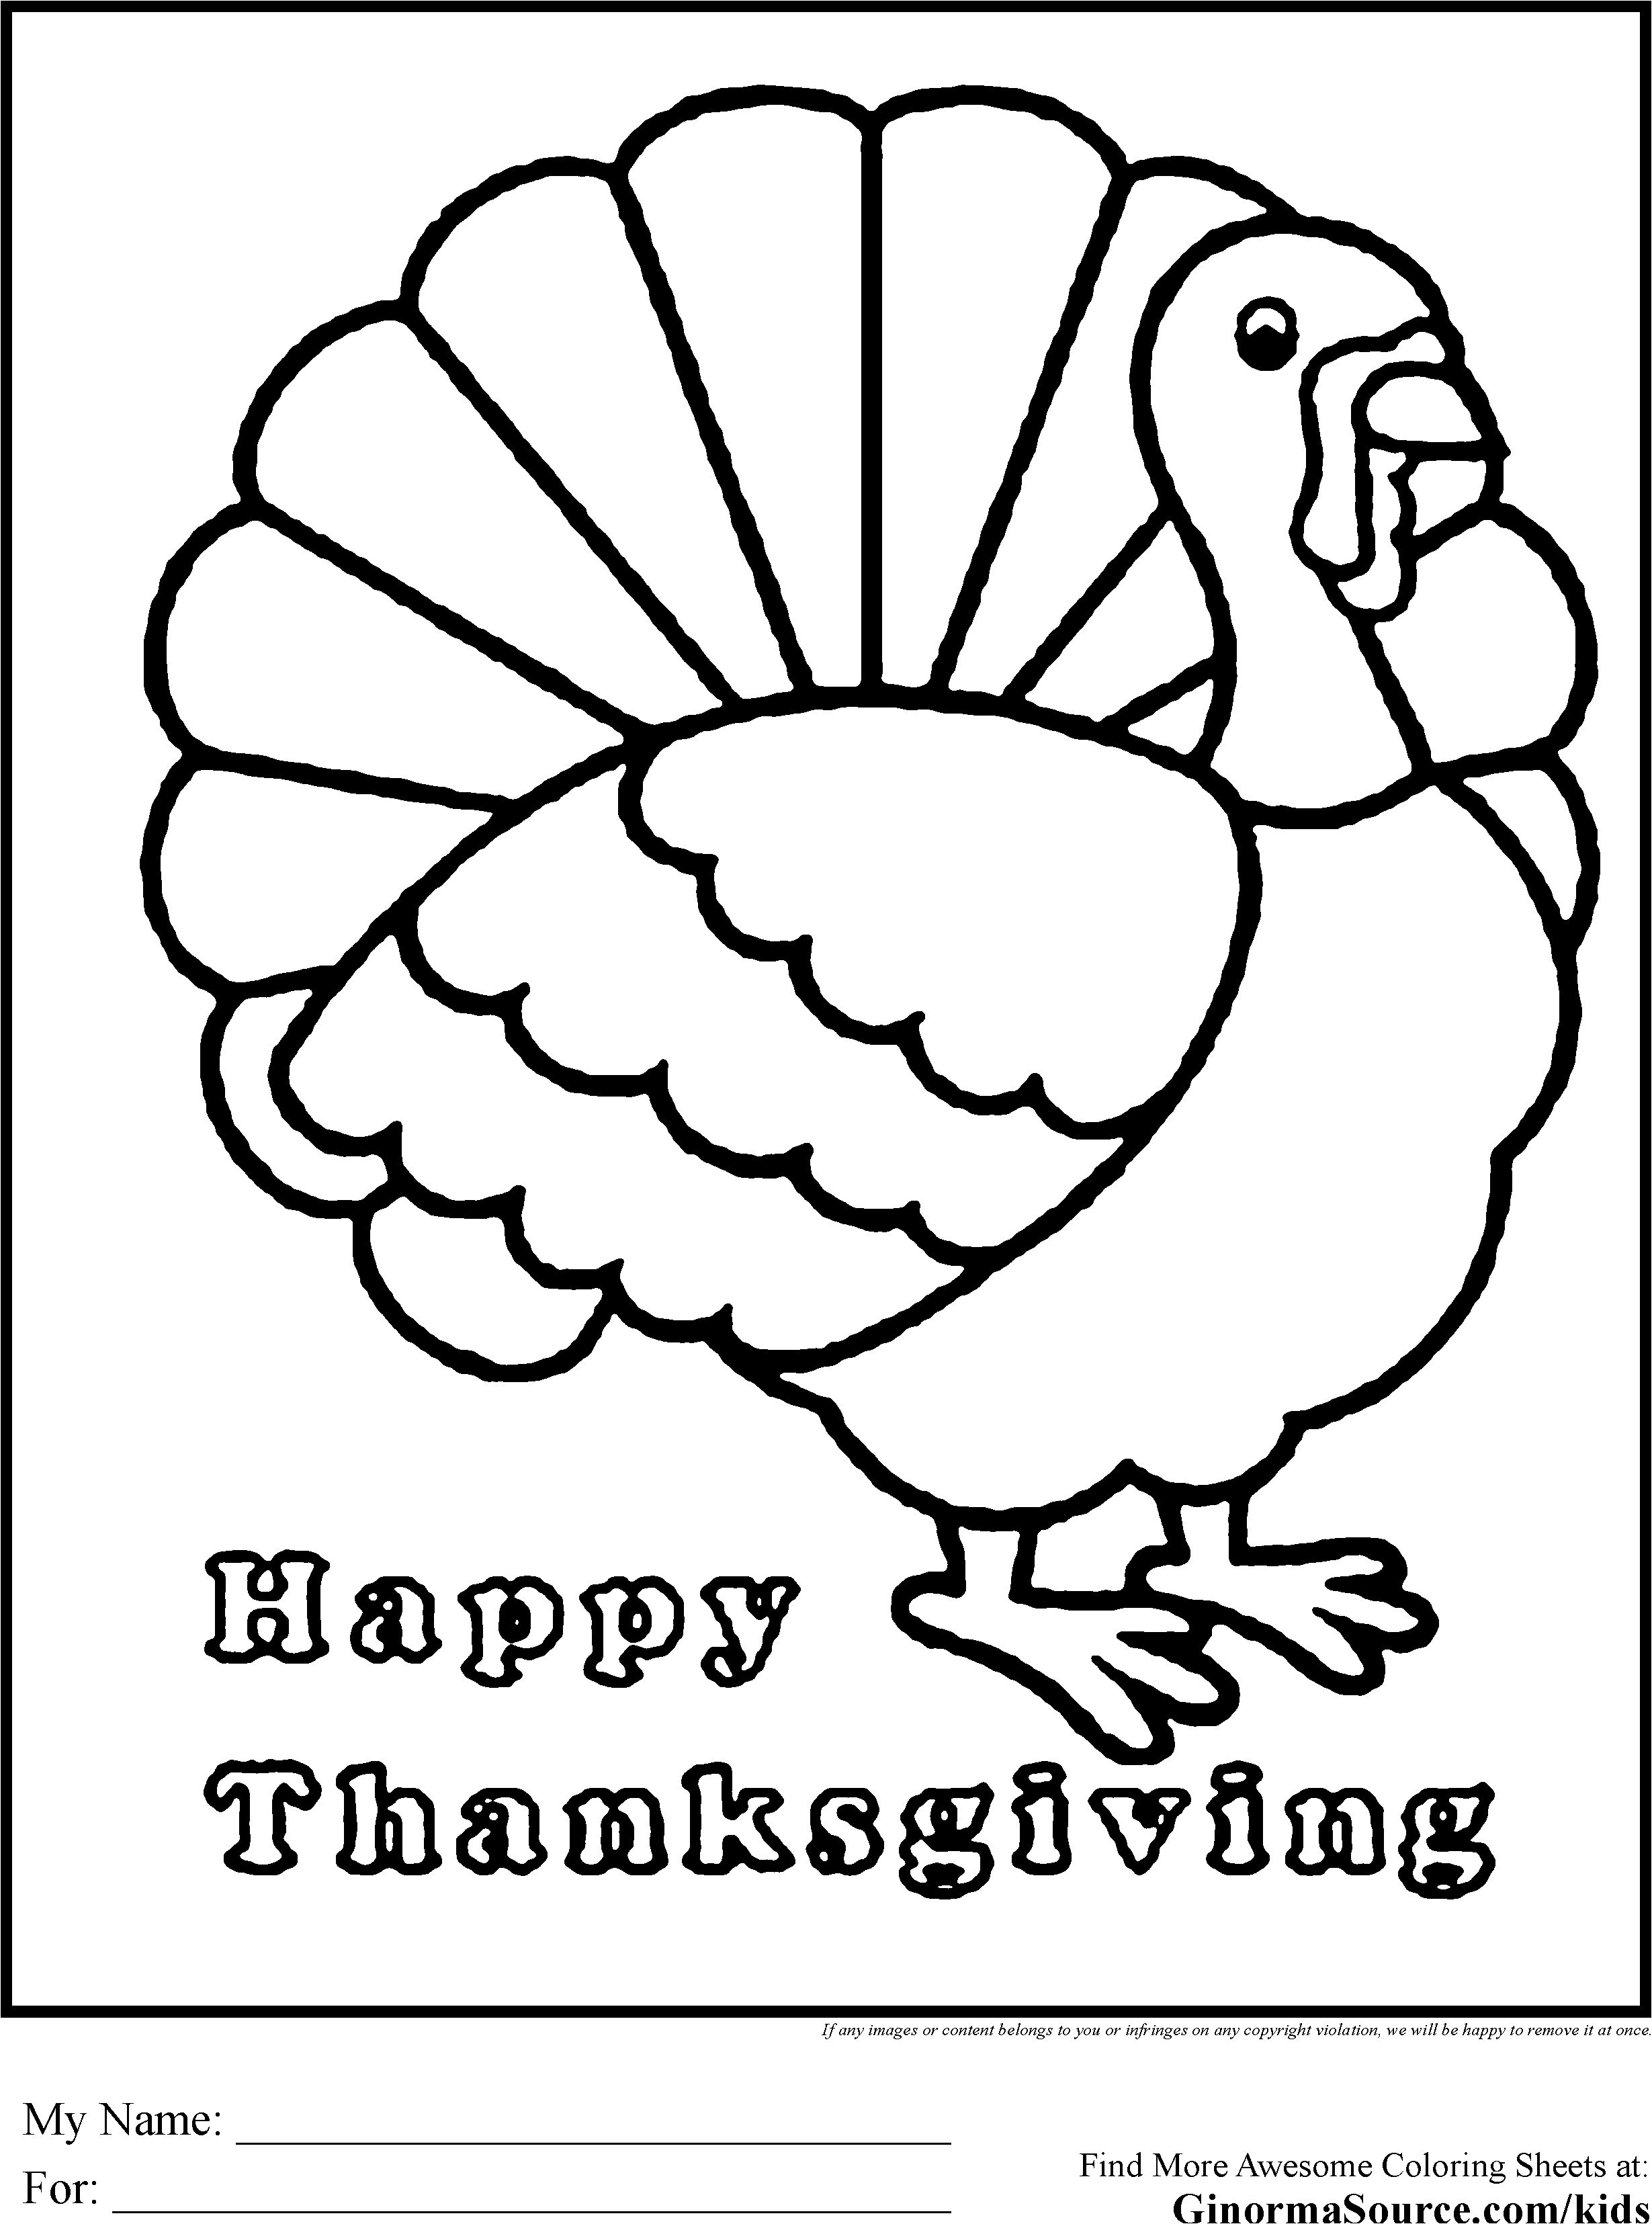 Labeled coloring pages of thanksgiving turkeys printable thanksgiving turkeys coloring pages thanksgiving turkey coloring pages by number